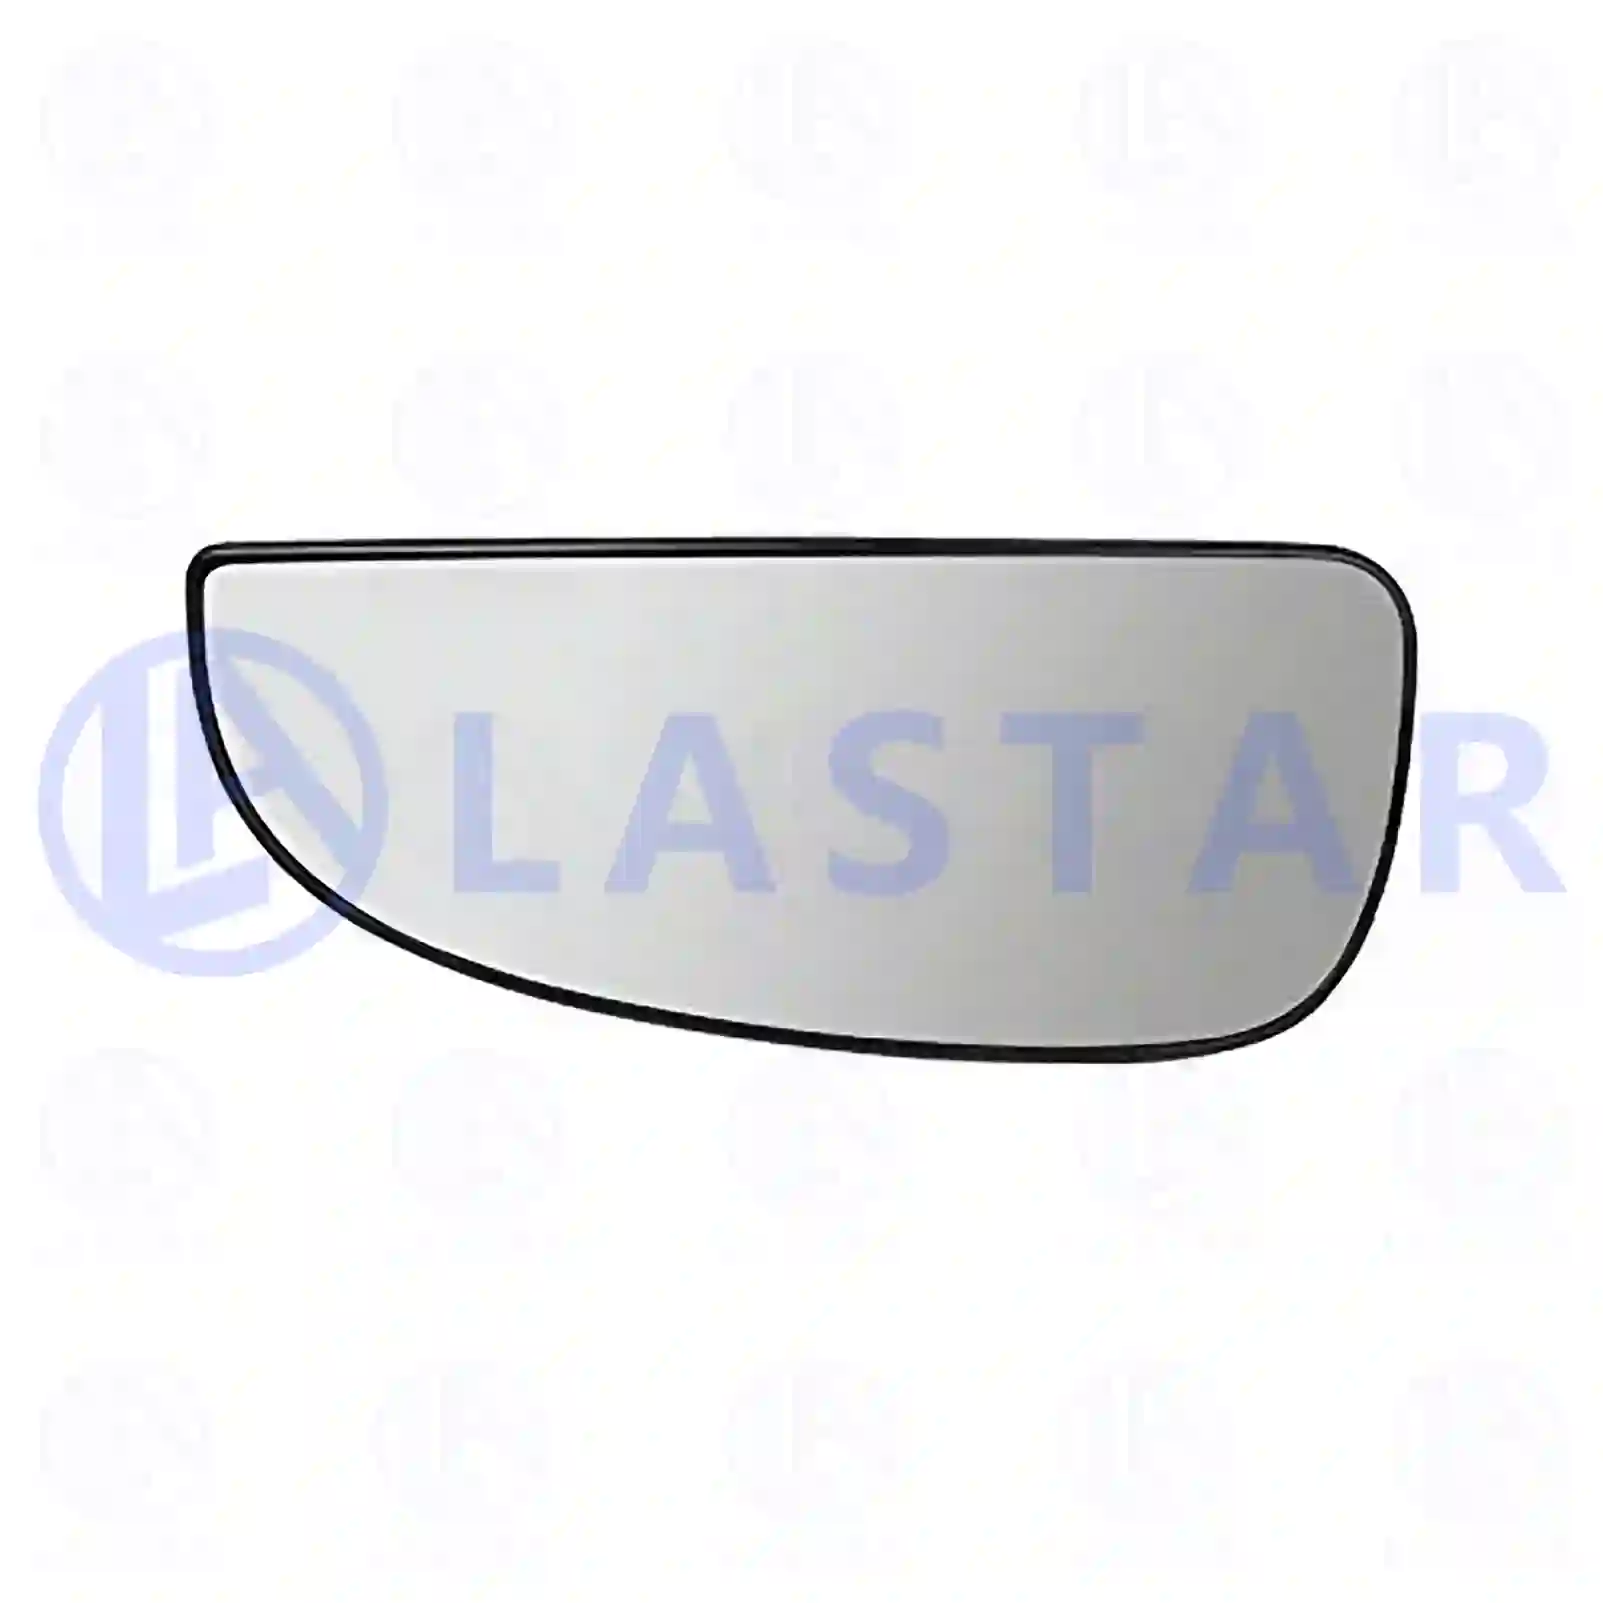 Mirror glass, wide view mirror, left, 77721412, 8151LL, 71748248, 8151LL ||  77721412 Lastar Spare Part | Truck Spare Parts, Auotomotive Spare Parts Mirror glass, wide view mirror, left, 77721412, 8151LL, 71748248, 8151LL ||  77721412 Lastar Spare Part | Truck Spare Parts, Auotomotive Spare Parts